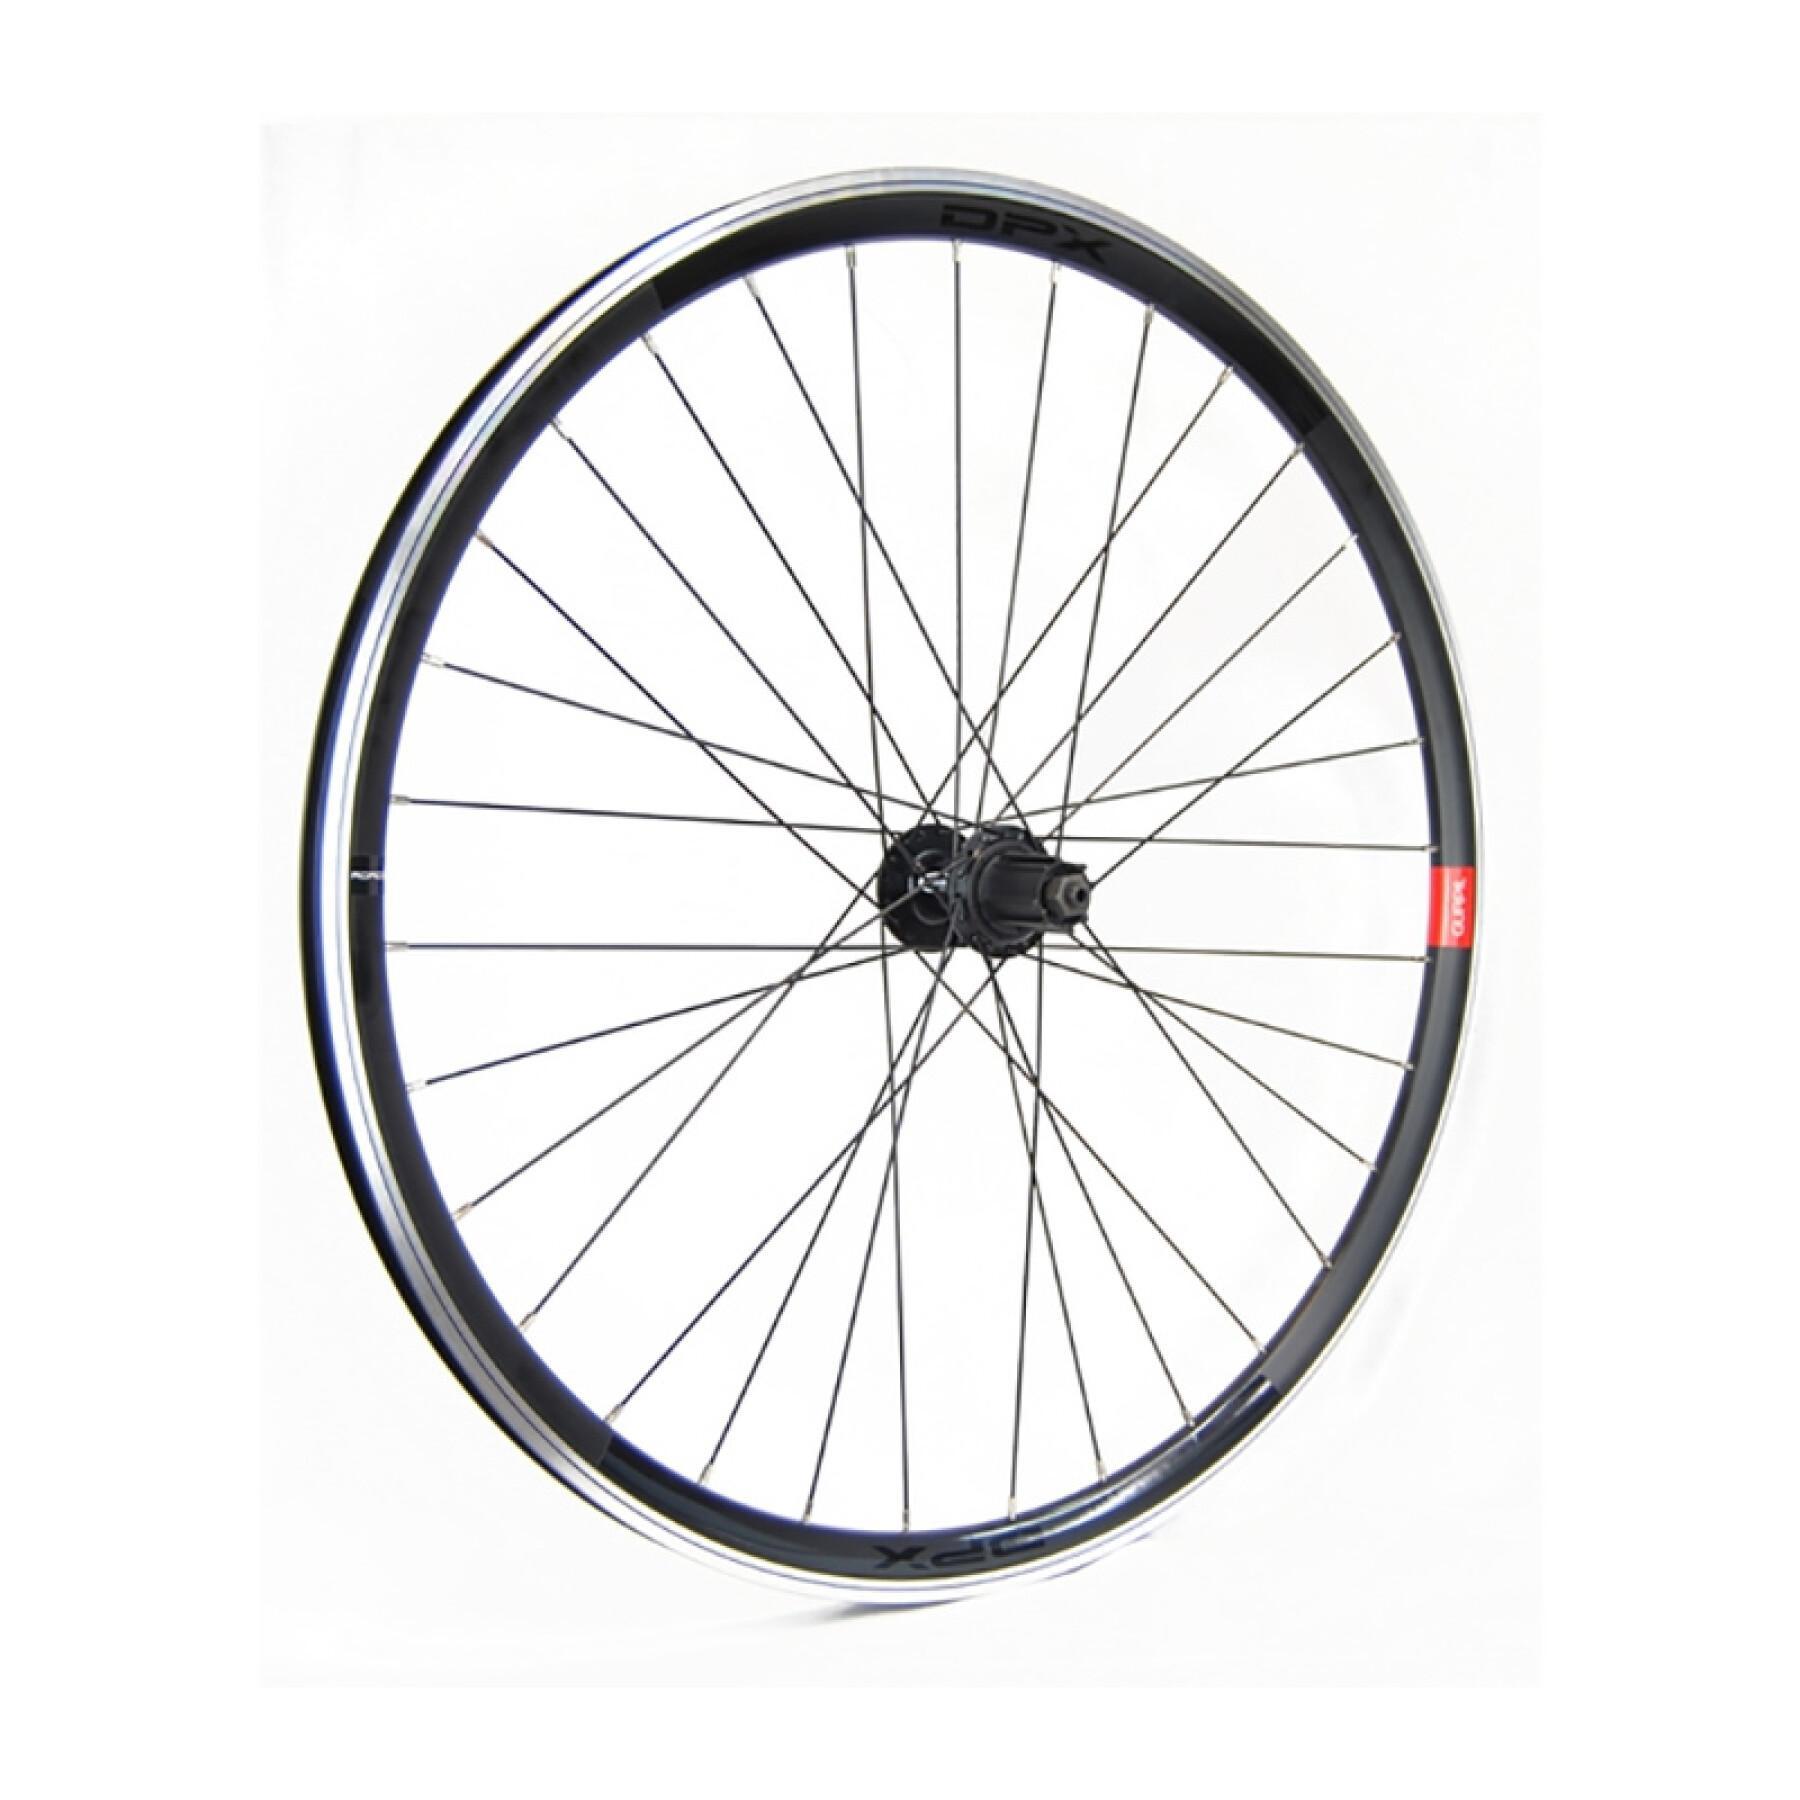 Achterwiel Gurpil NEW DPX Campagnolo 8-12V